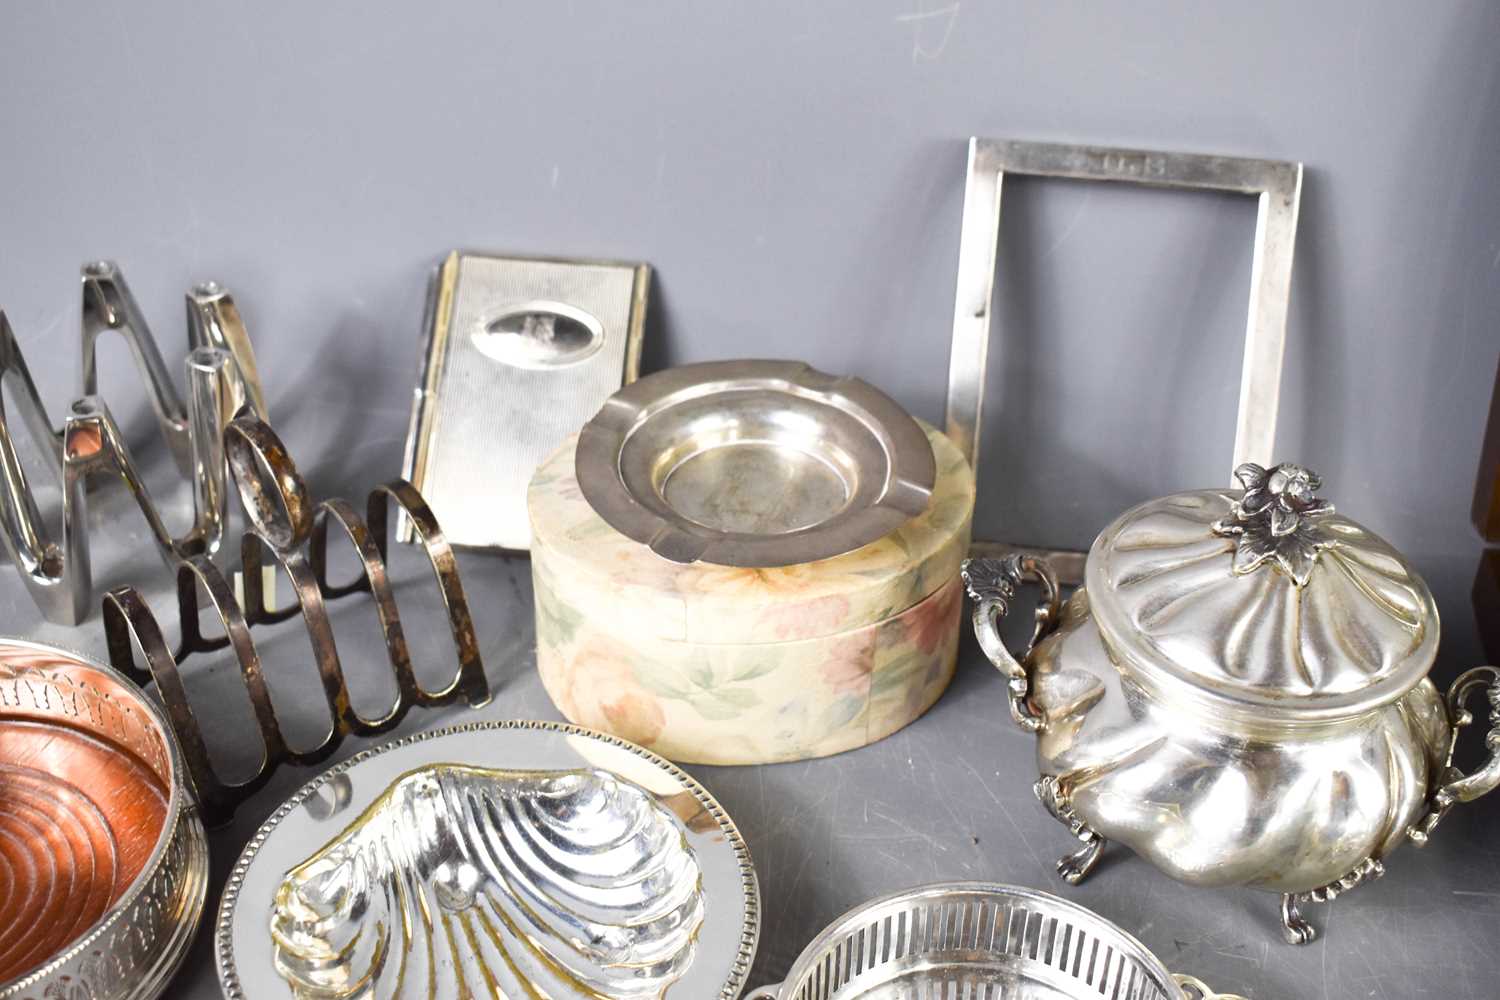 A sterling silver photograph frame a/f, group of silver plateware to include a tea canister, toast - Image 2 of 2